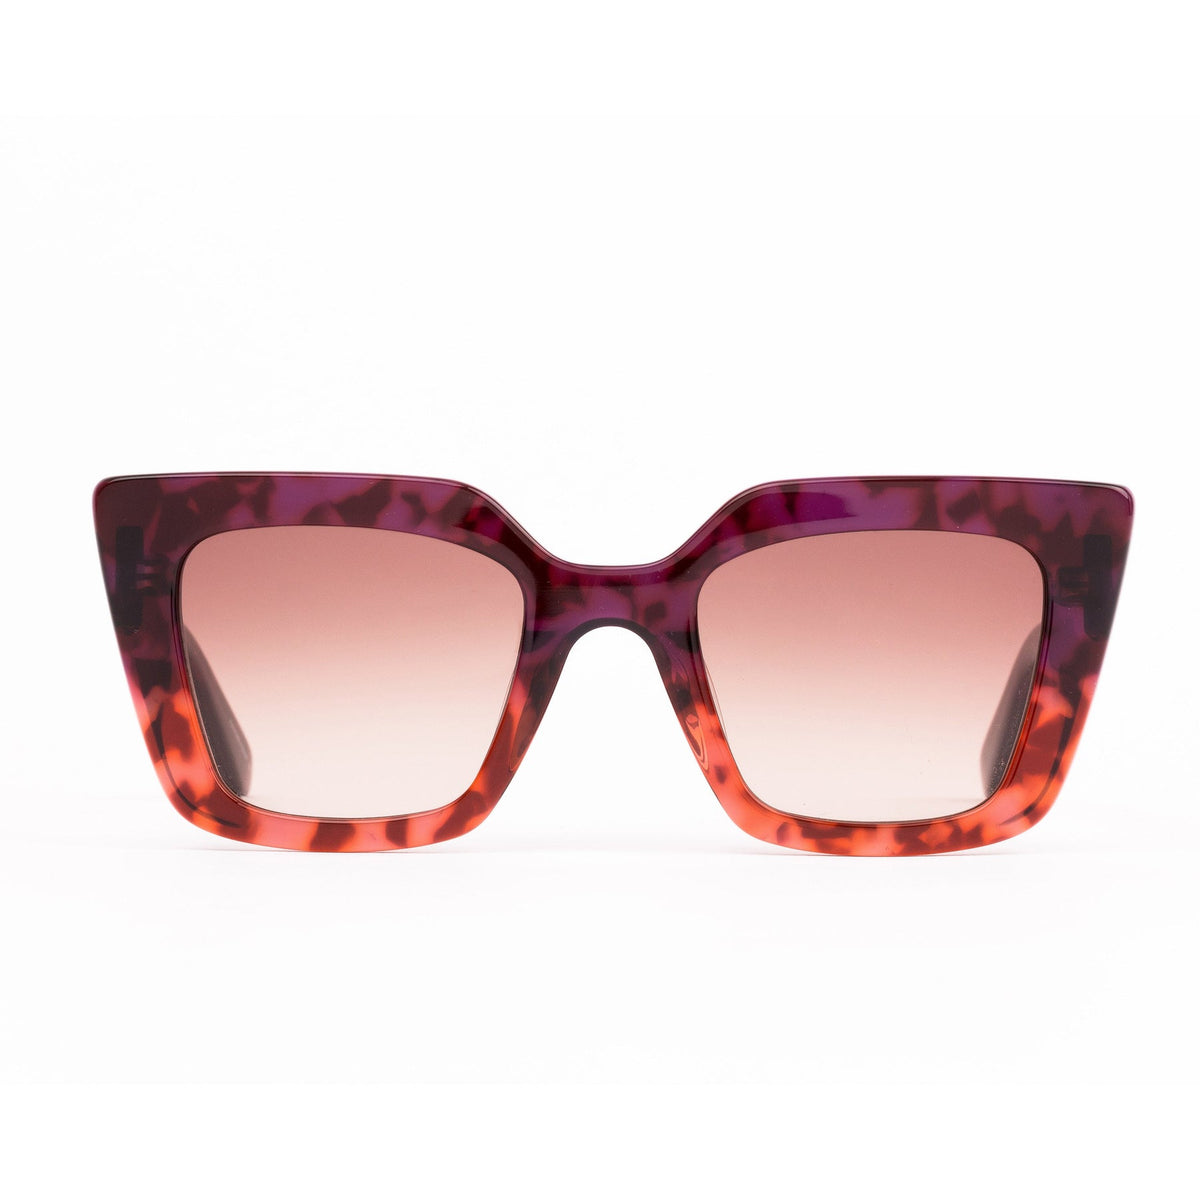 SITO CULT VISION SUNGLASSES-ROSEWOOD TORT